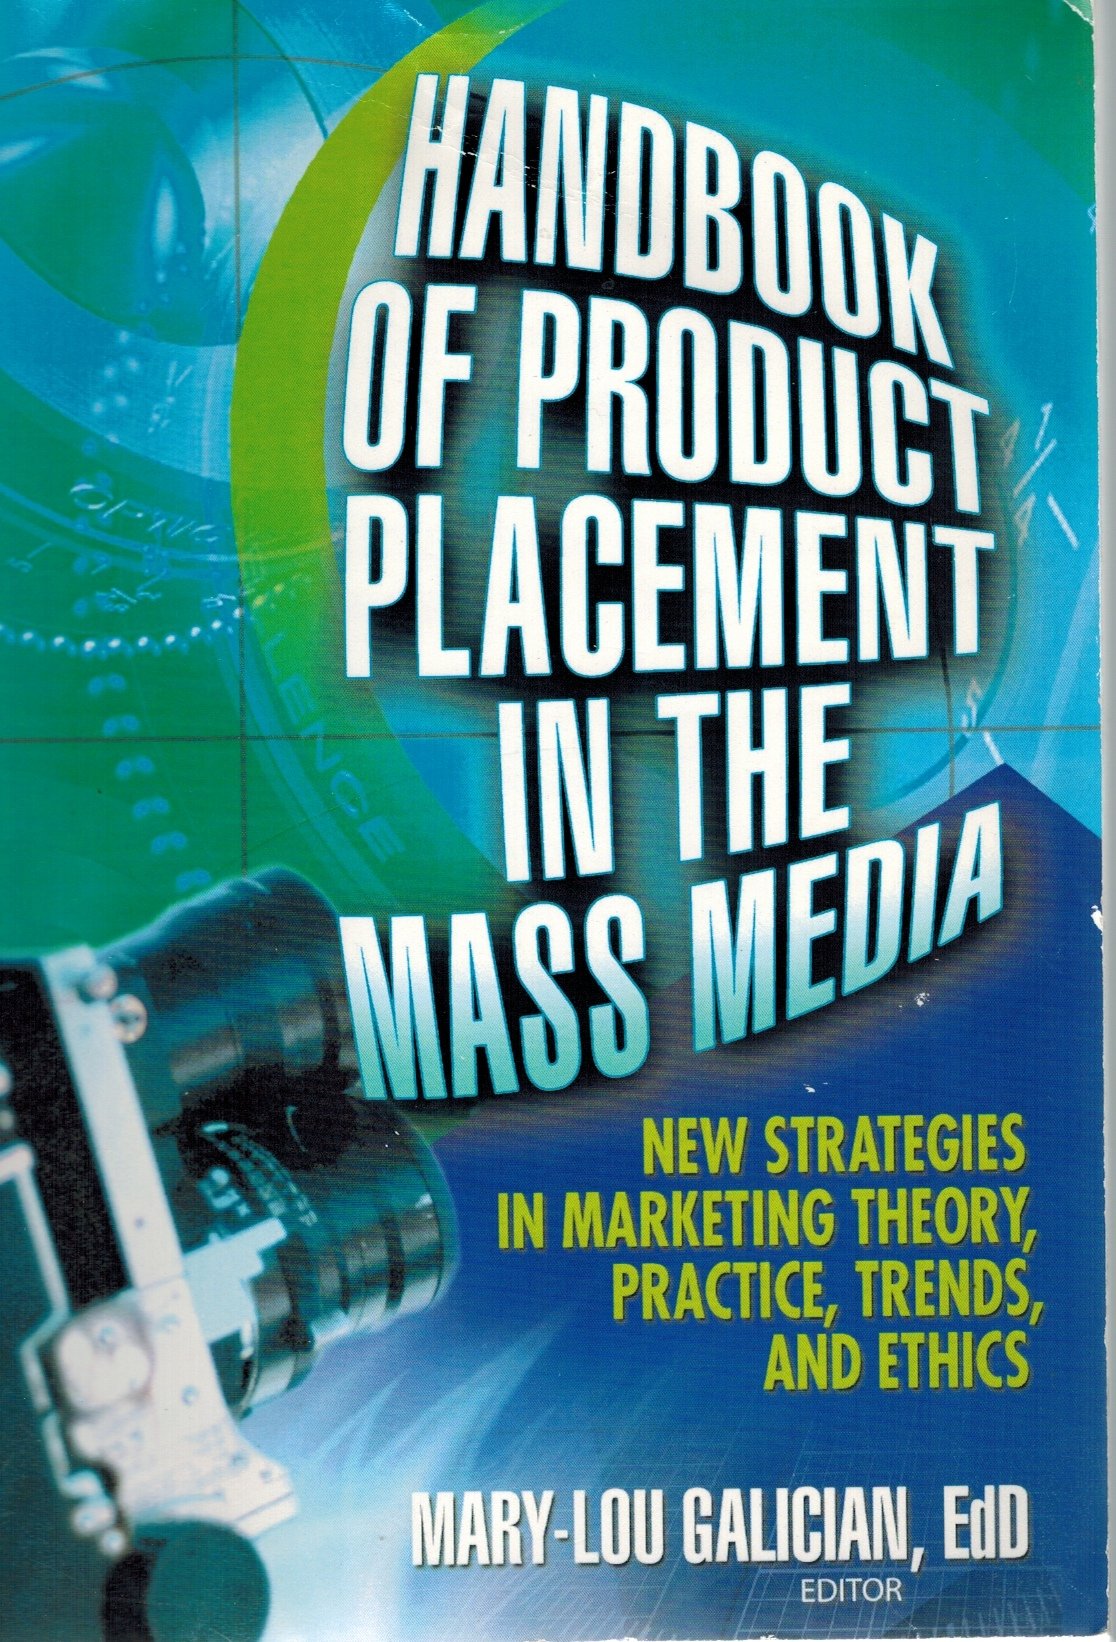 Handbook of Product Placement in the Mass Media  New Strategies in  Marketing Theory, Practice, Trends, and Ethics - books-new